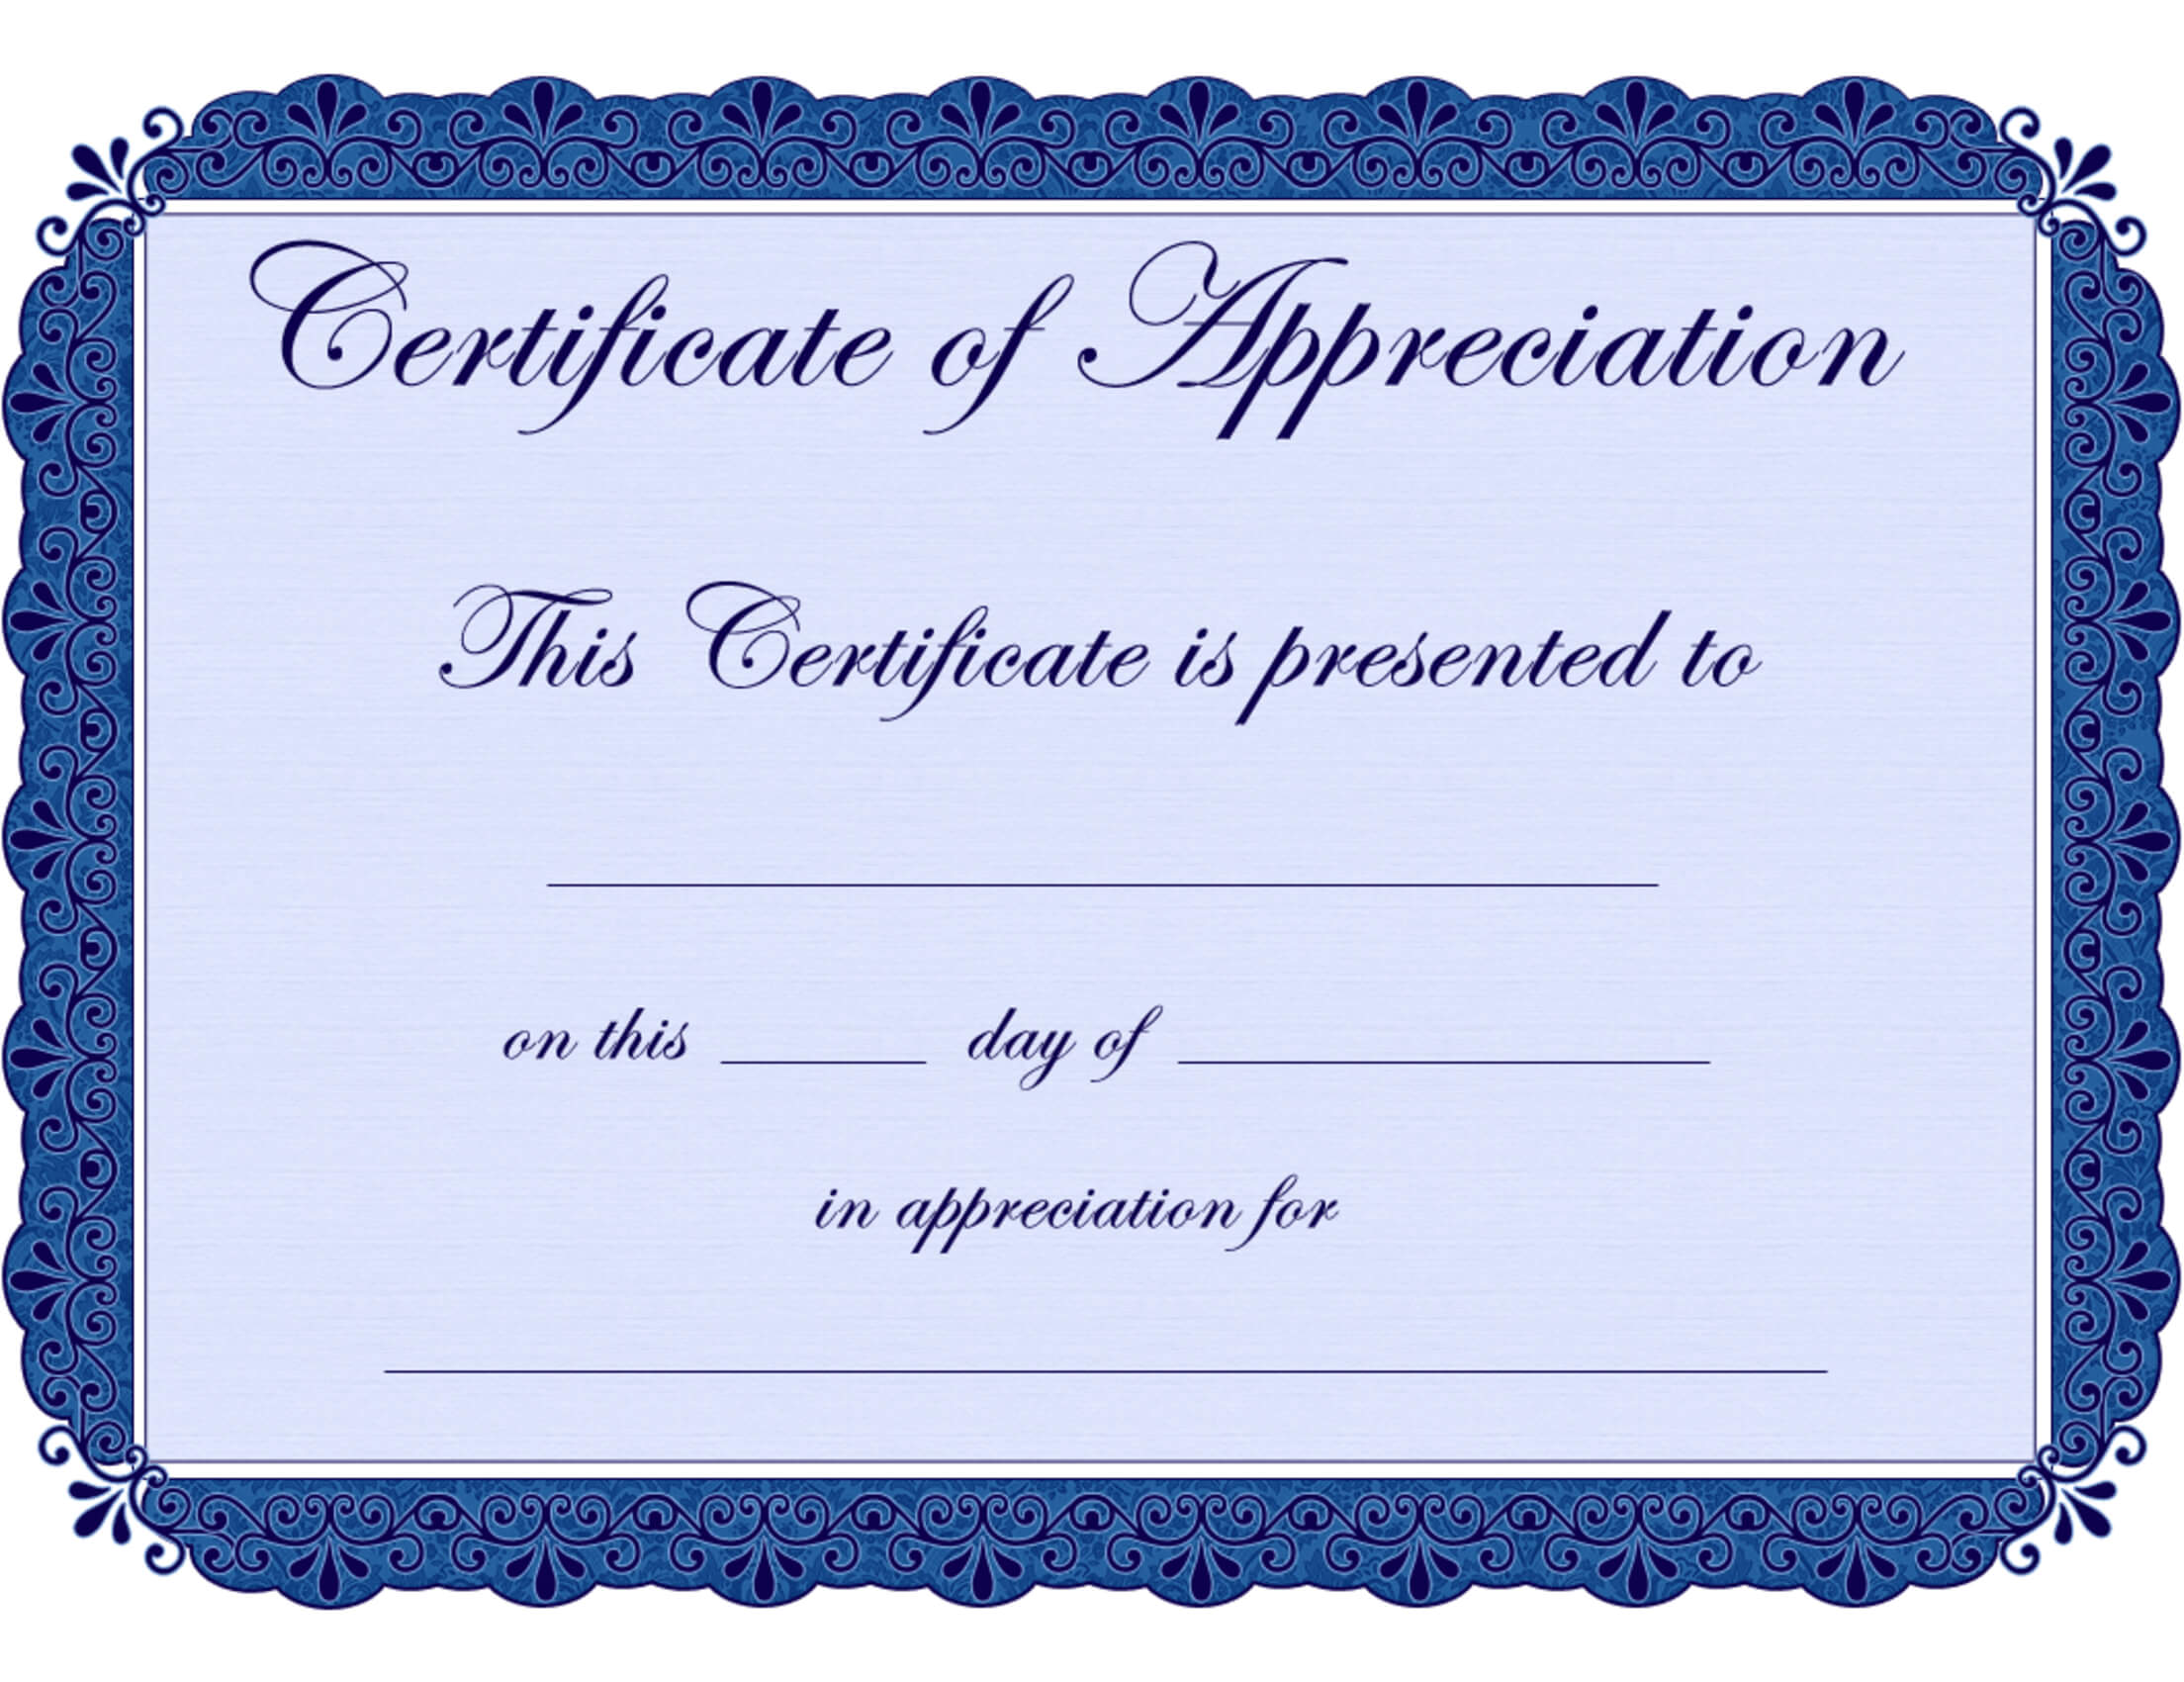 Free Printable Certificates Certificate Of Appreciation In Safety Recognition Certificate Template